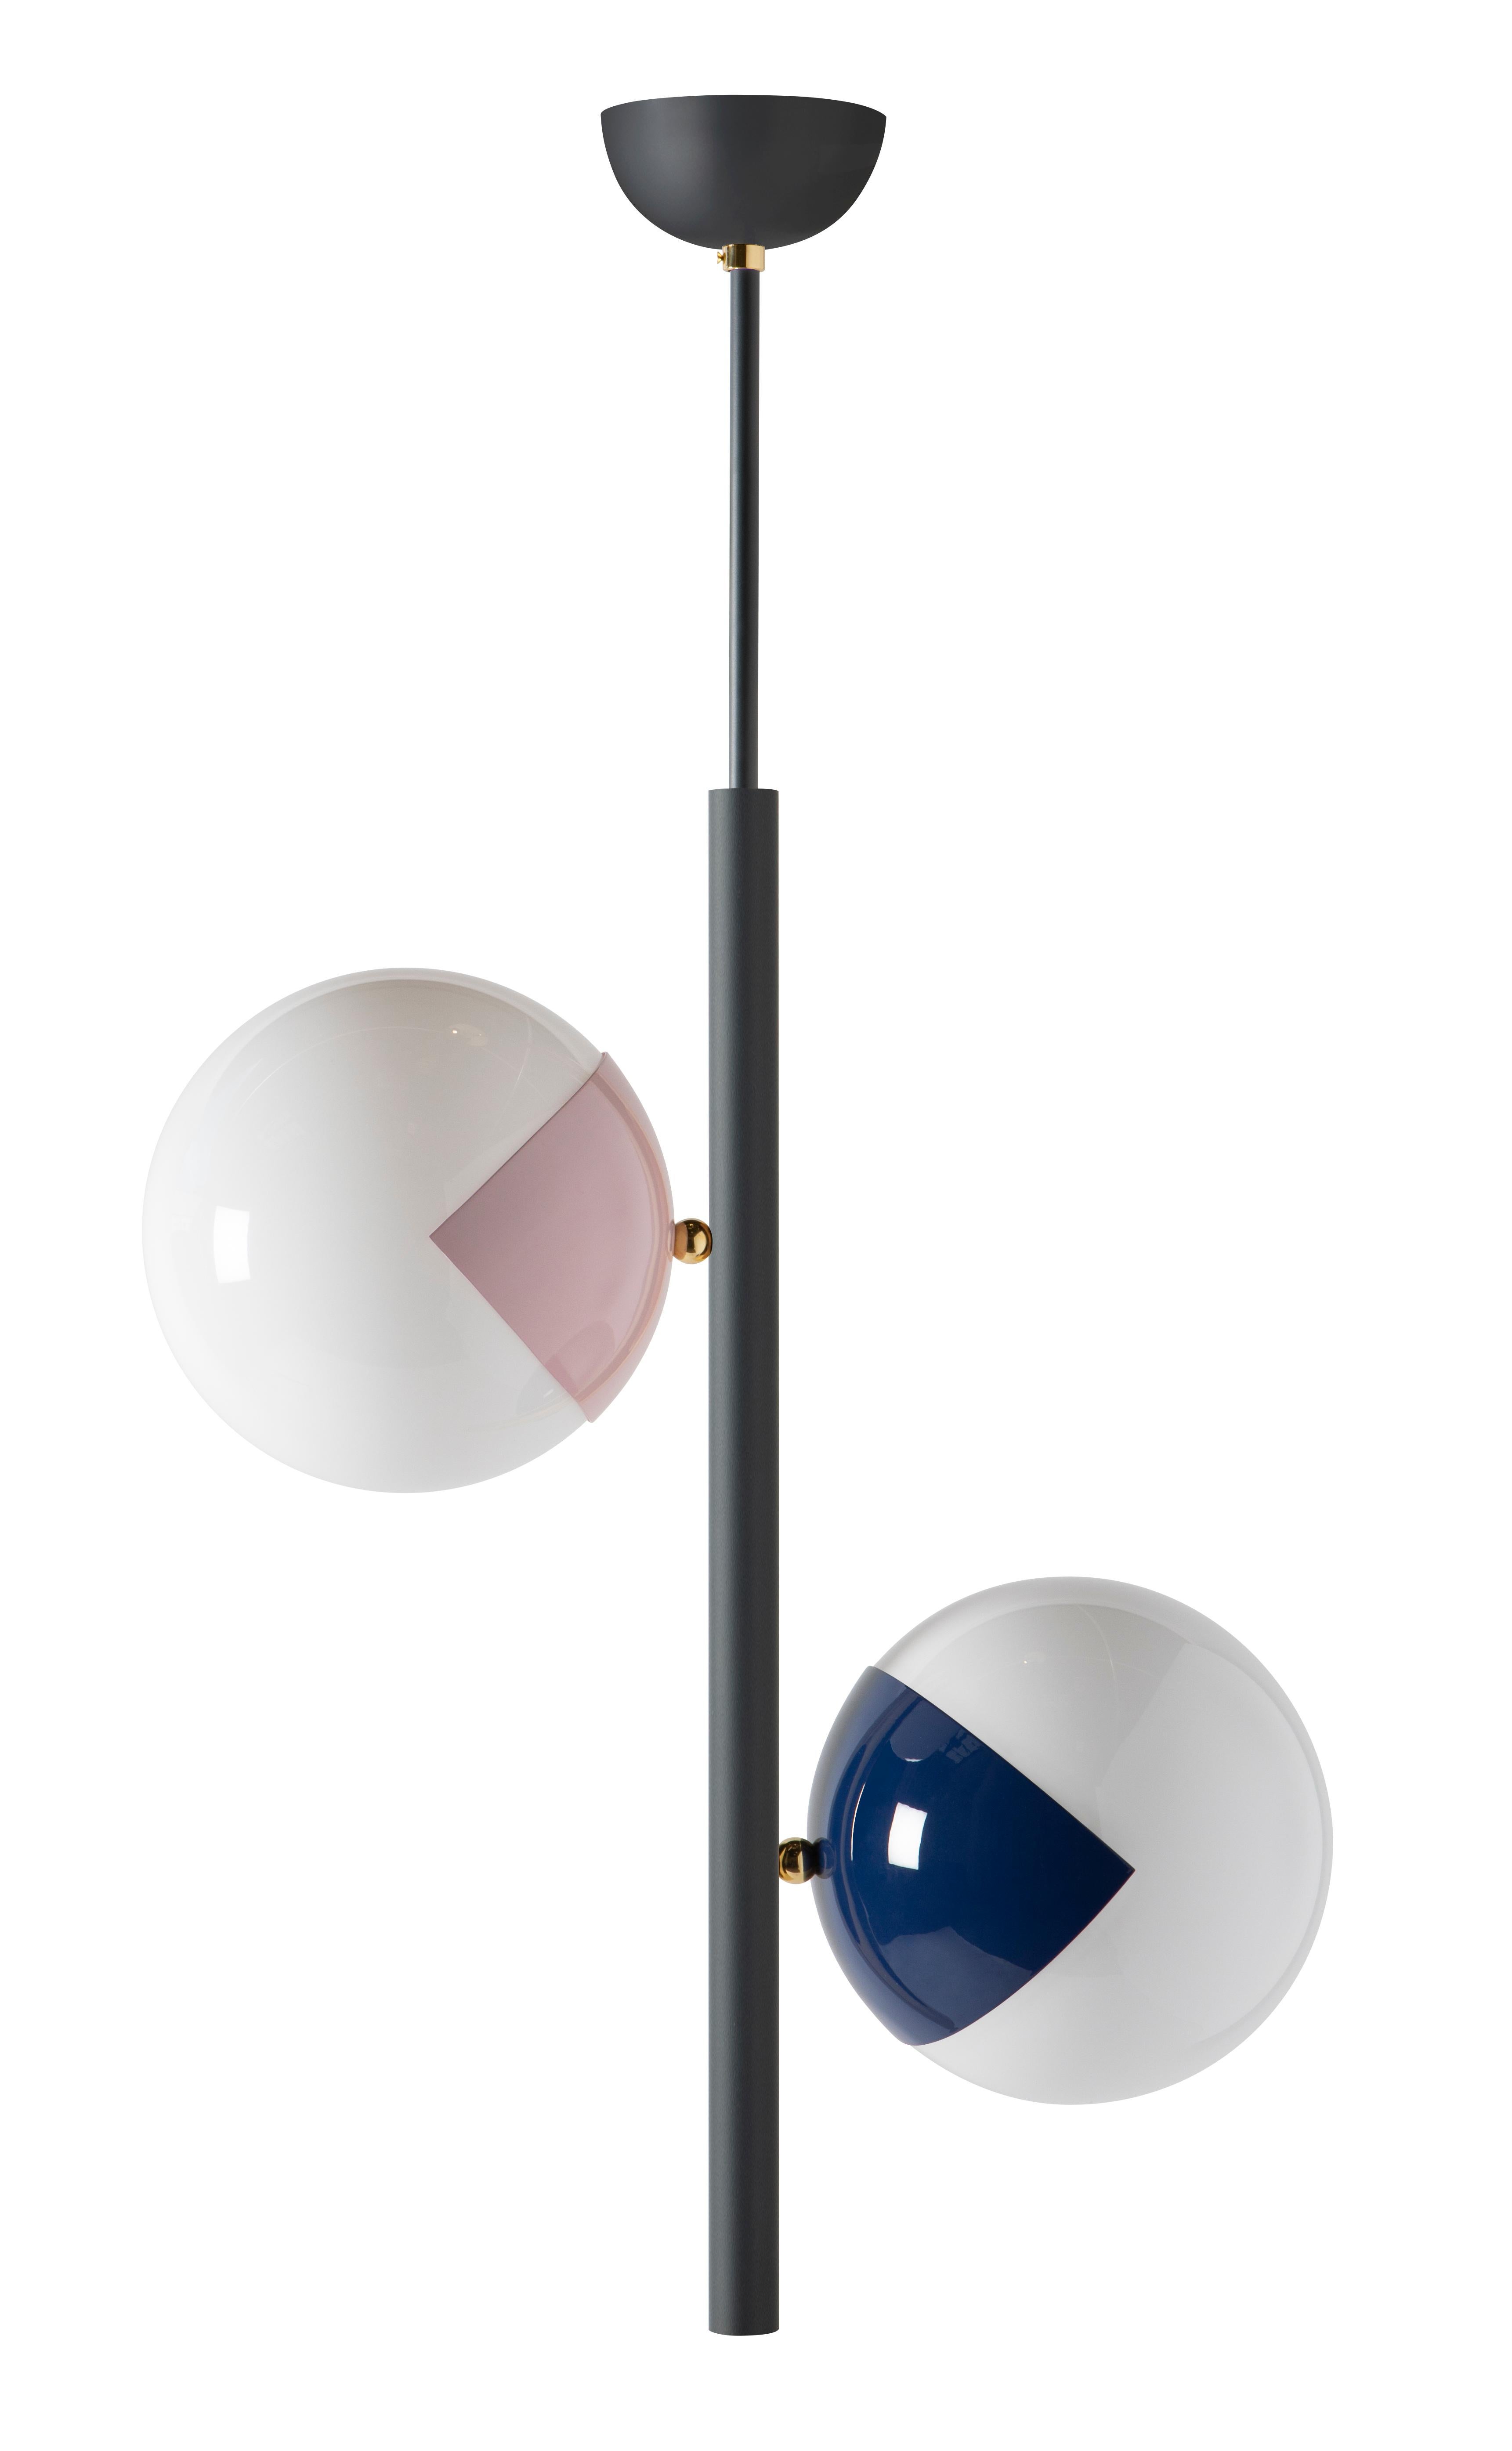 Pair of pop up chandeliers 135 by Magic Circus Editions.
Dimensions: W 58 x H 135 cm.
 Measure: diameter sphere 25 cm.
Materials: smooth brass and glossy mouth blown glass.

Available finishes: brass, nickel, matte black tube and brass, matte